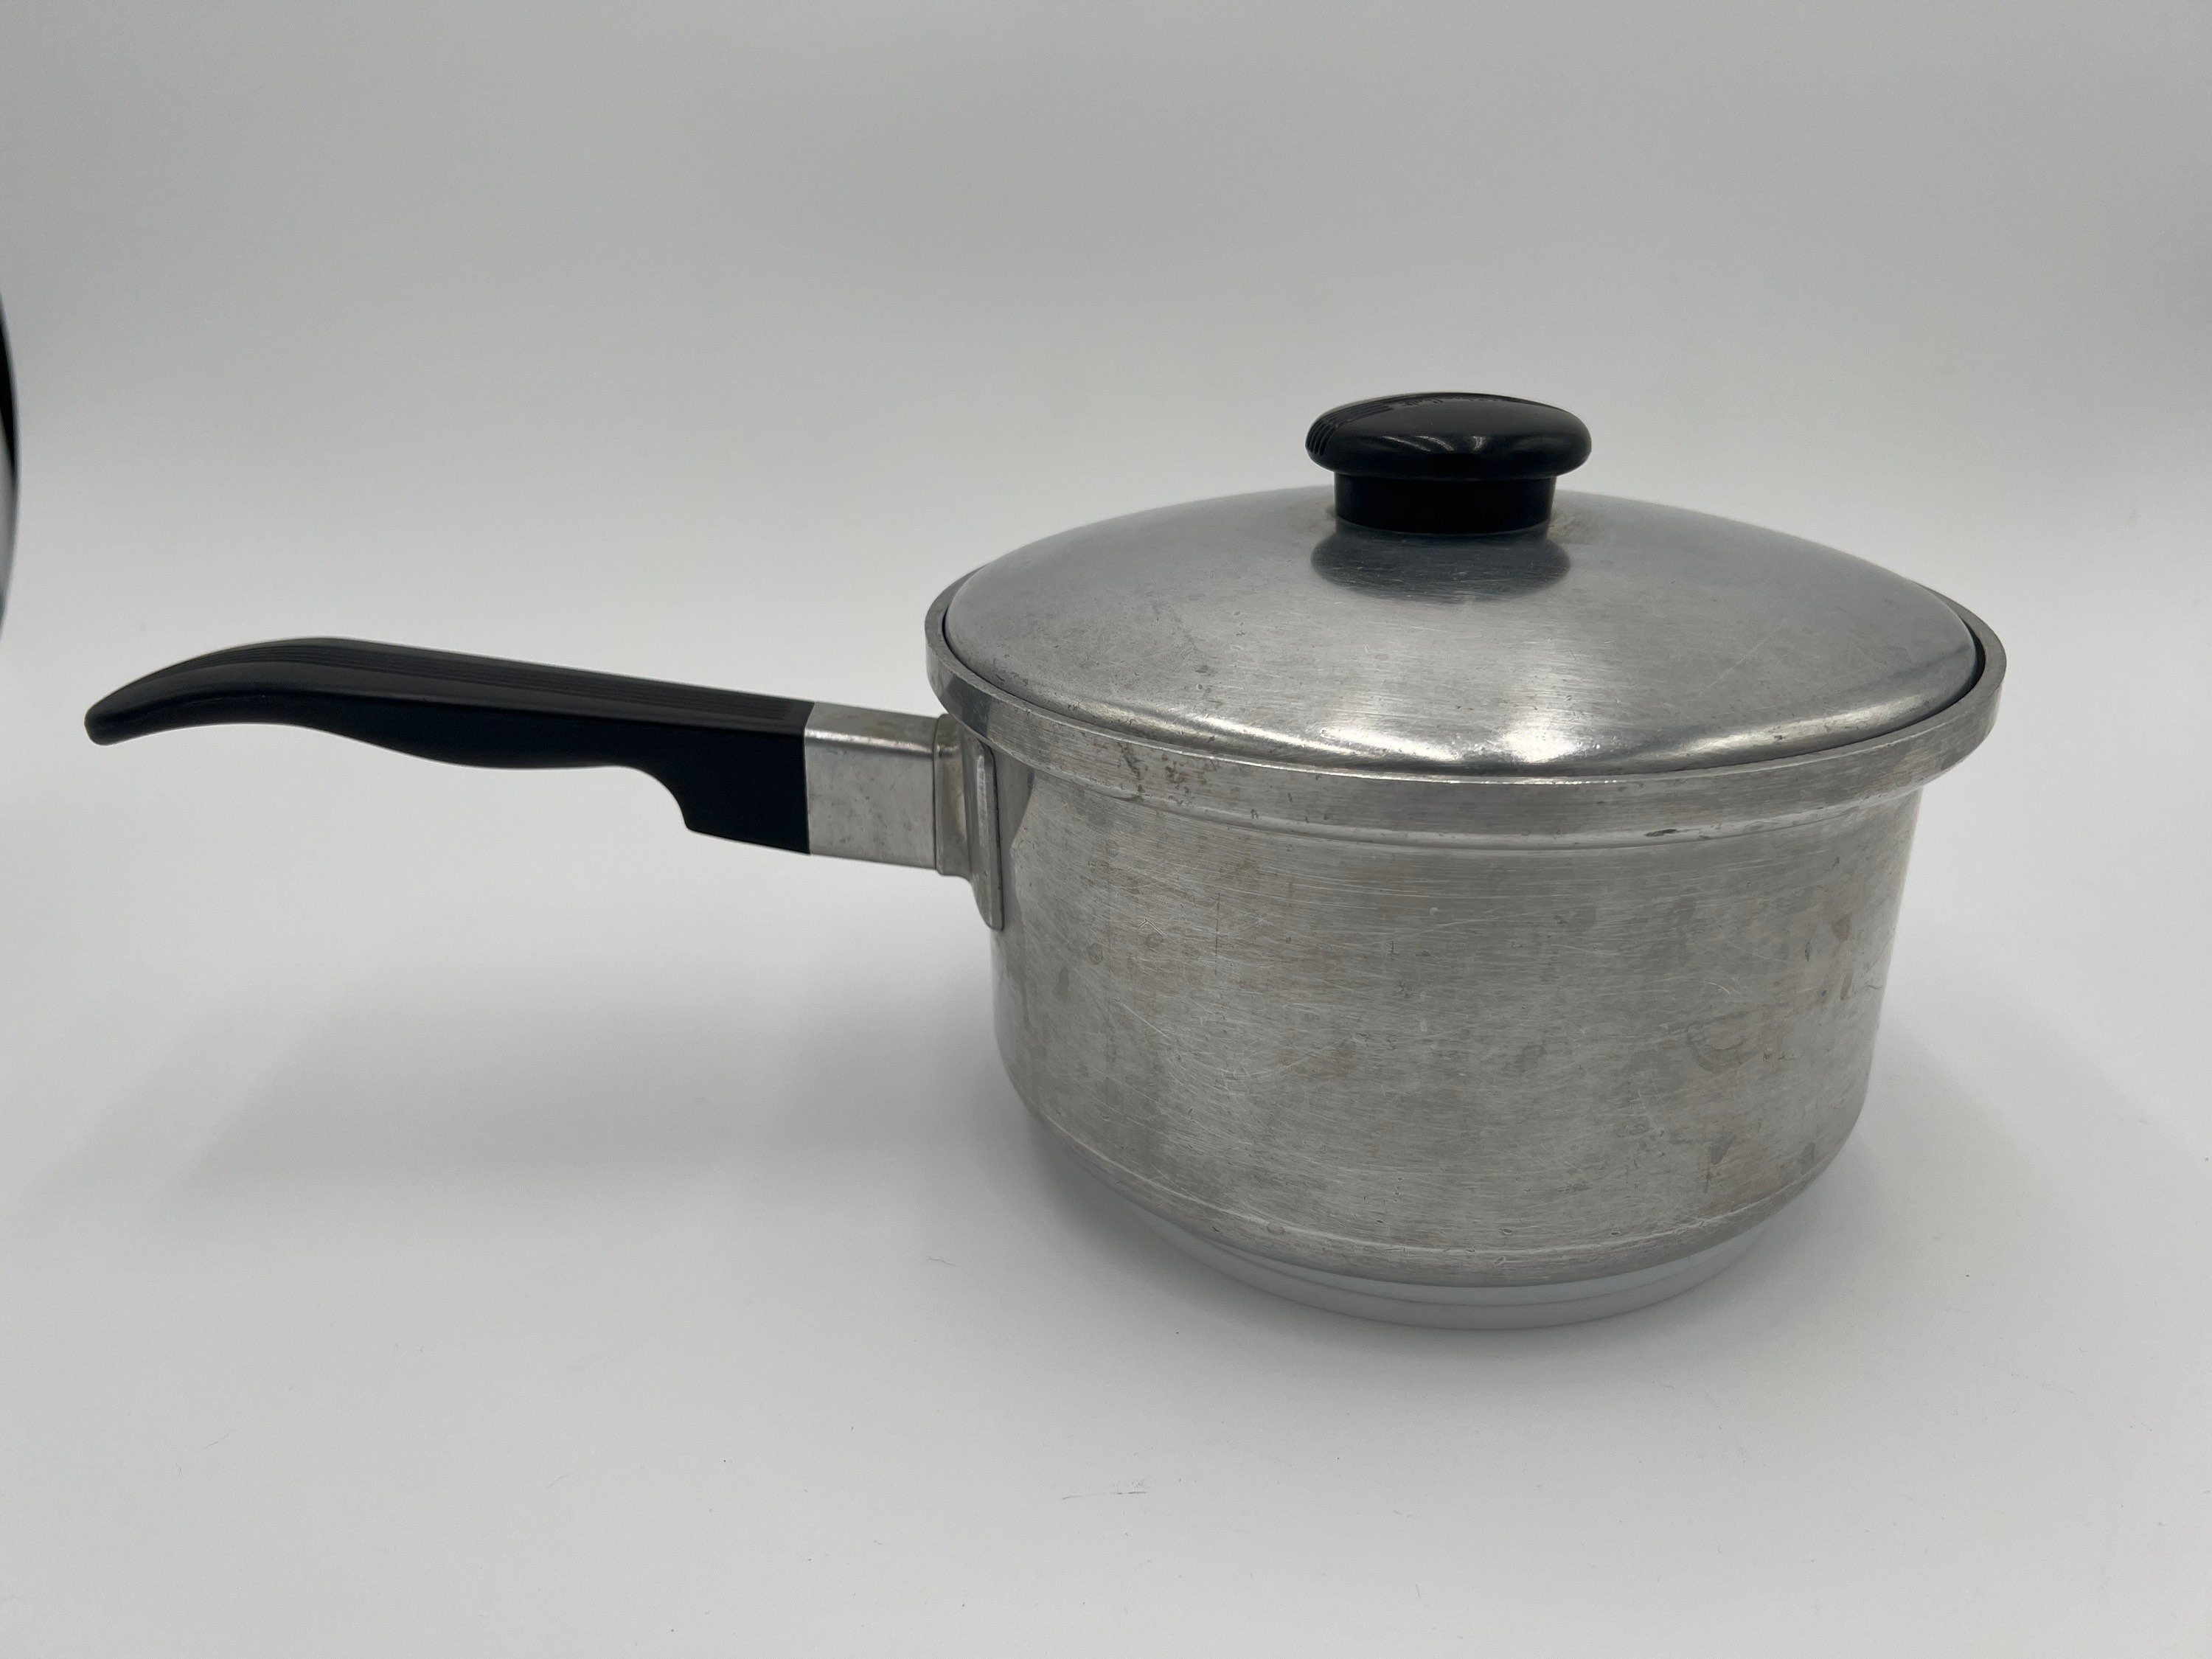 Kitchen Craft West Bend 3 Quart Qt Saucepan & Lid Stainless Steel Made in  USA